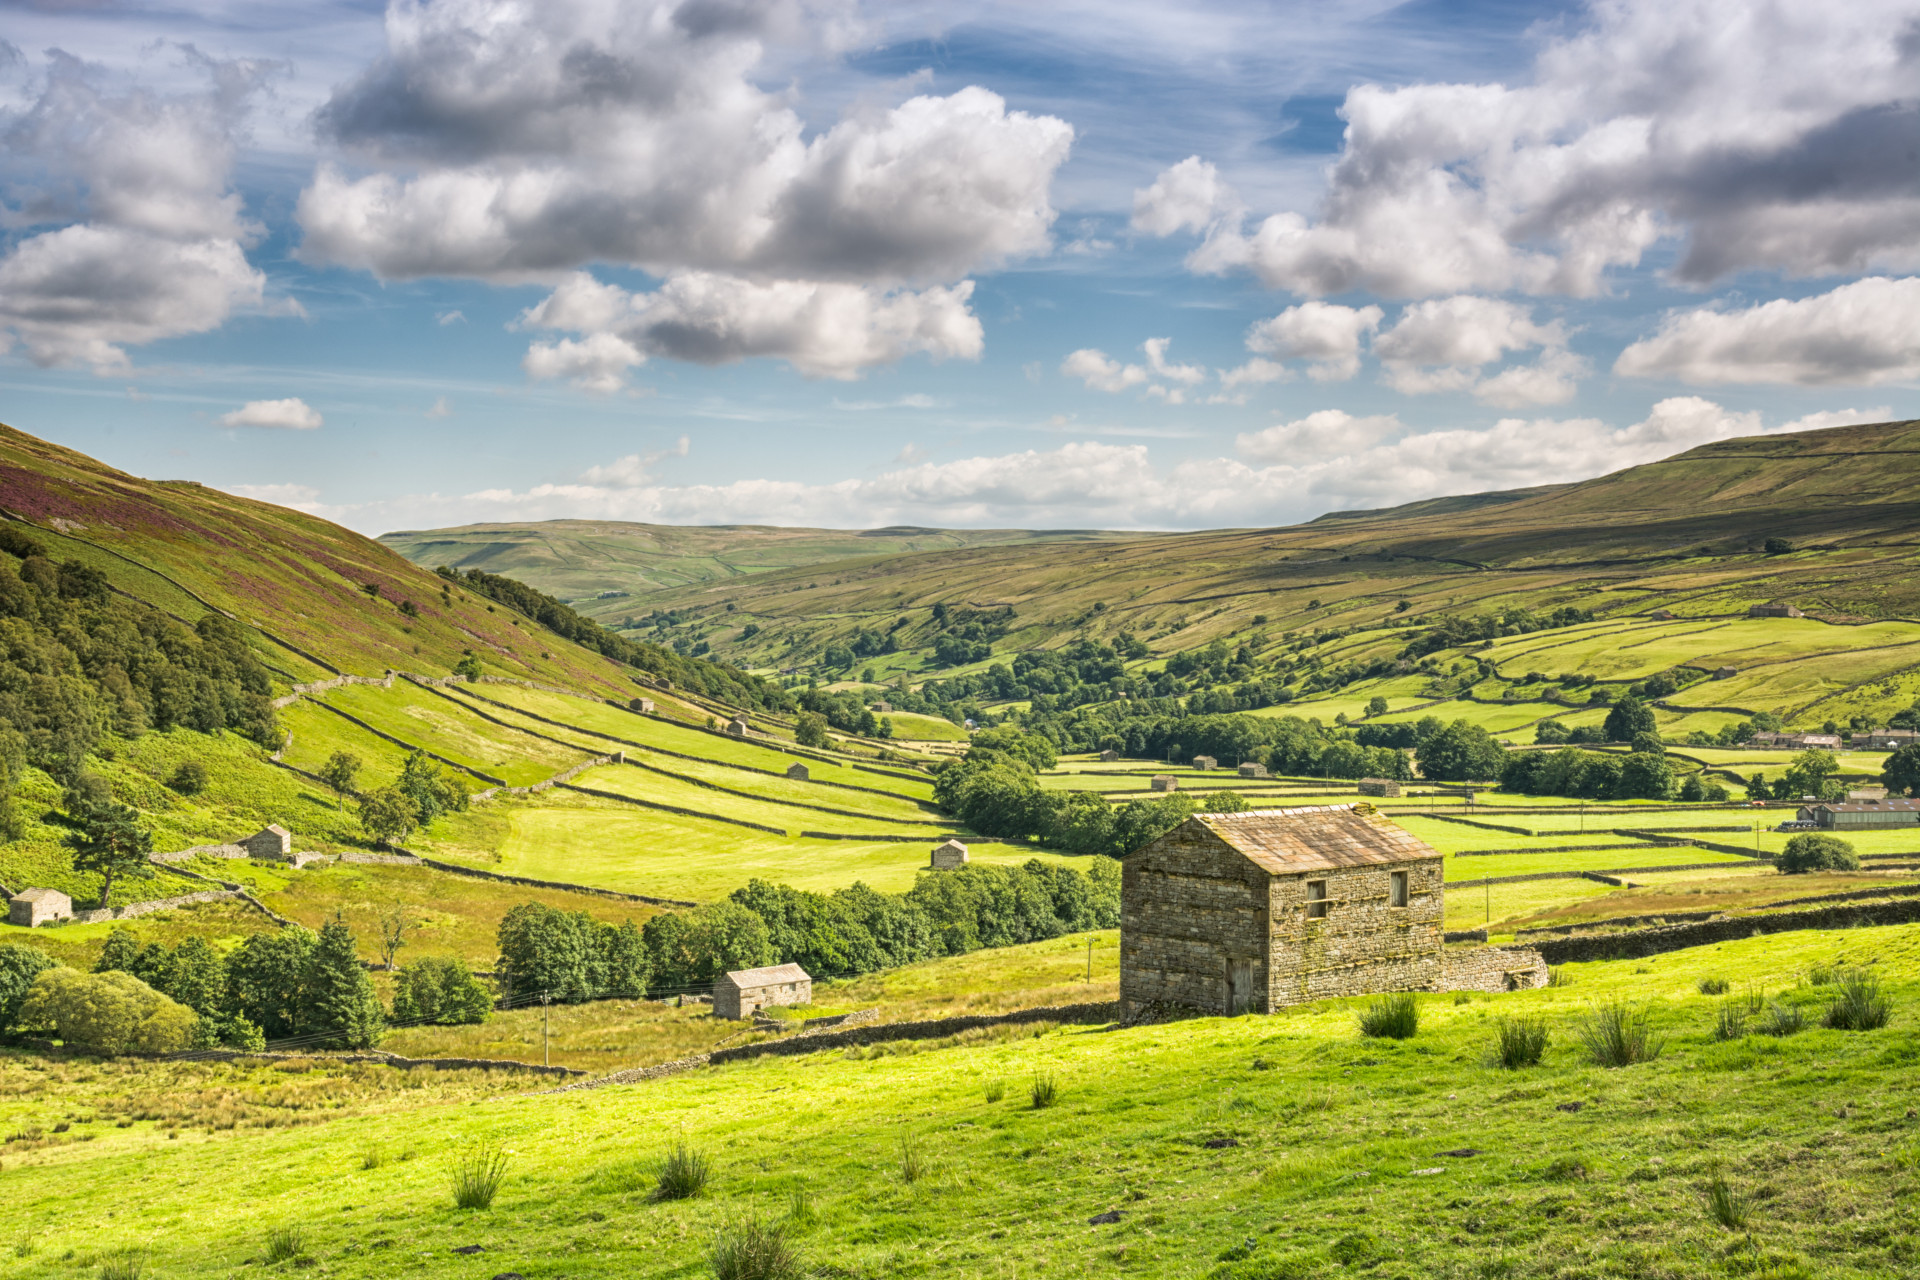 This 44-mile route circles two of Yorkshire’s finest dales, Swaledale and Arkengarthdale.<p><a href="https://www.msn.com/en-us/community/channel/vid-7xx8mnucu55yw63we9va2gwr7uihbxwc68fxqp25x6tg4ftibpra?cvid=94631541bc0f4f89bfd59158d696ad7e">Follow us and access great exclusive content every day</a></p>